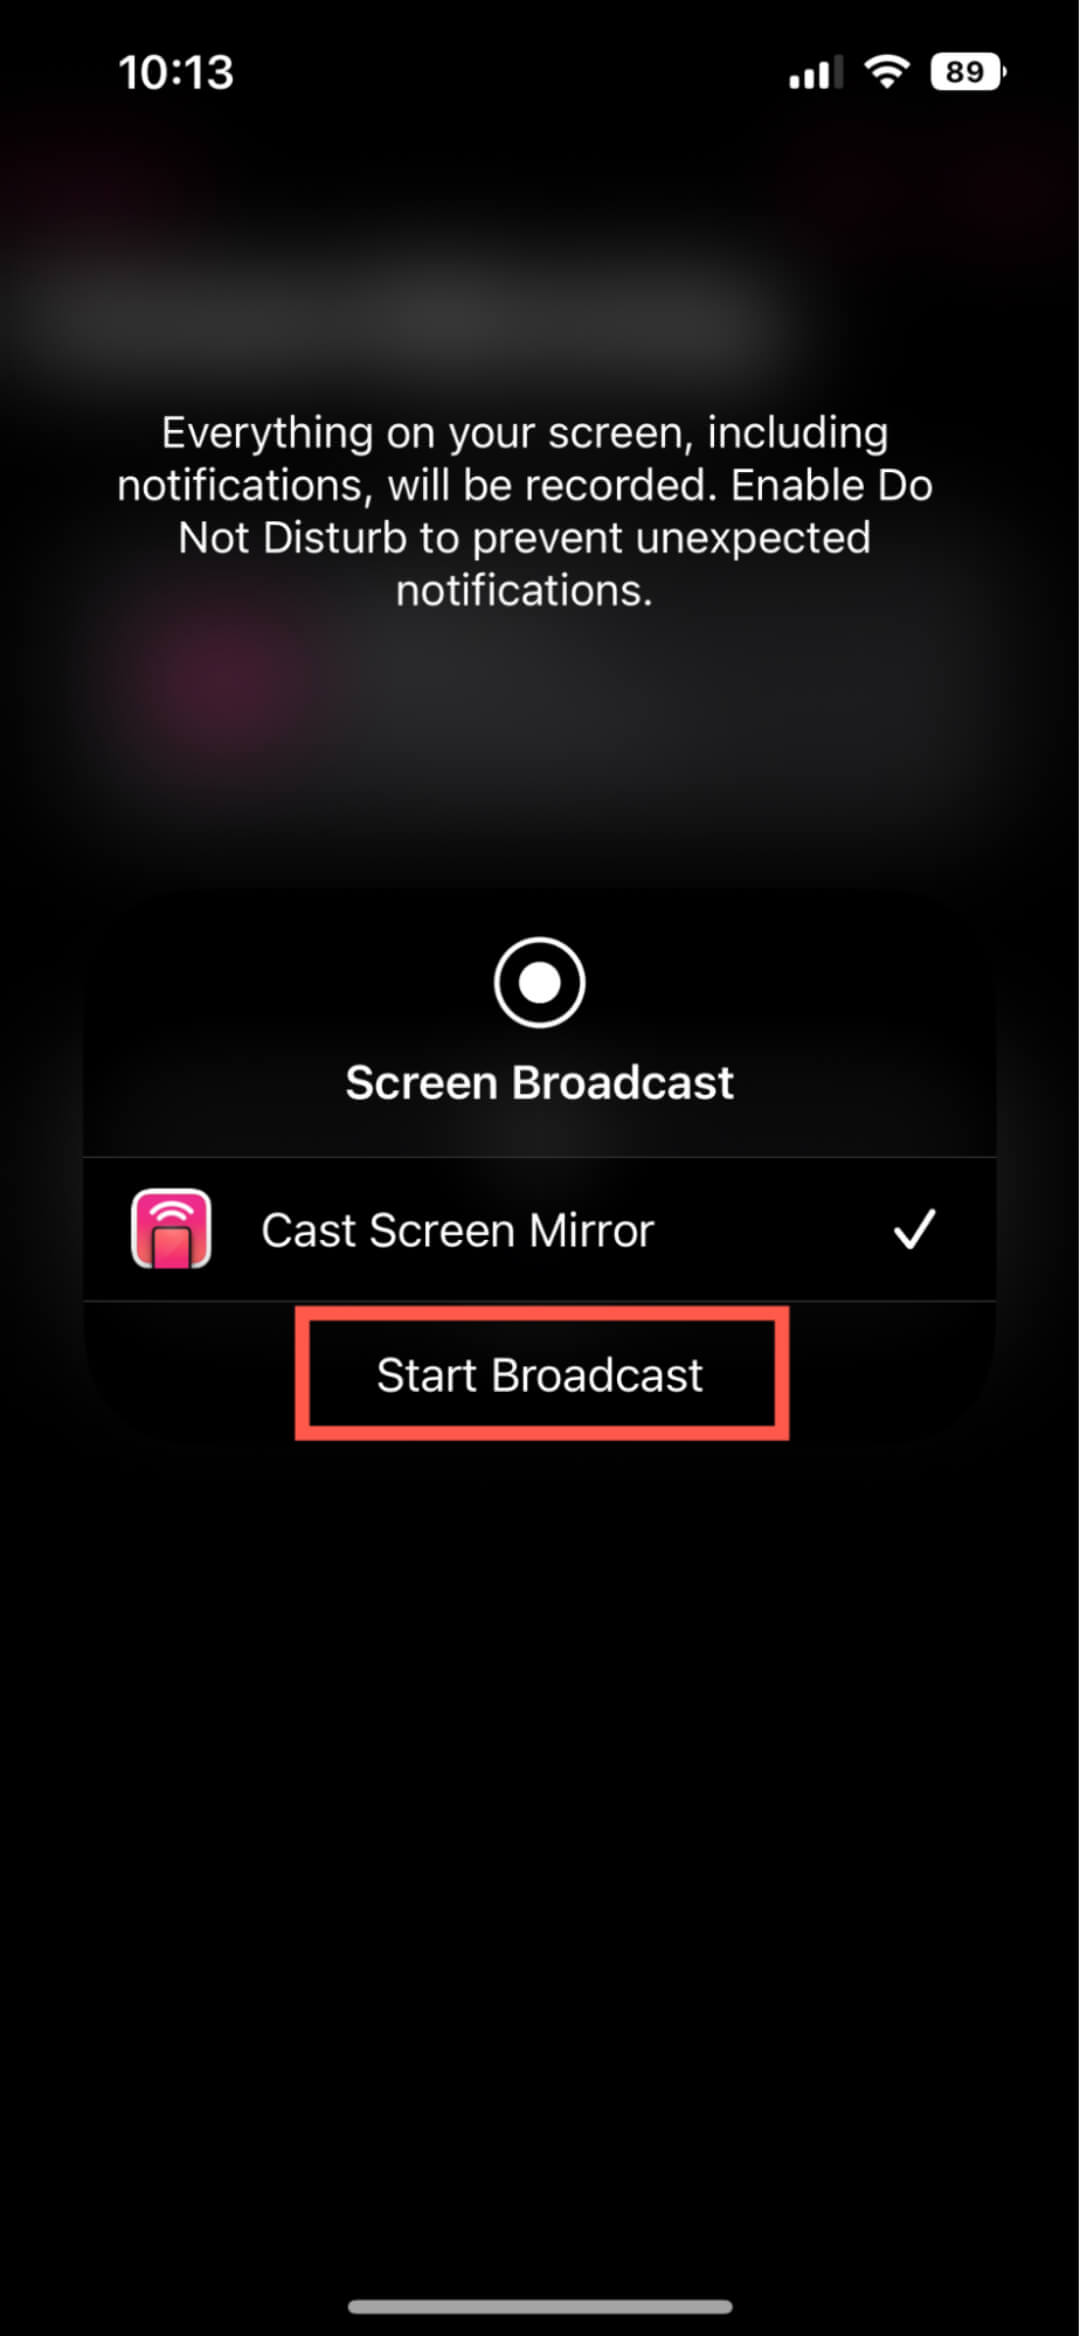 Tap the Start Broadcast button